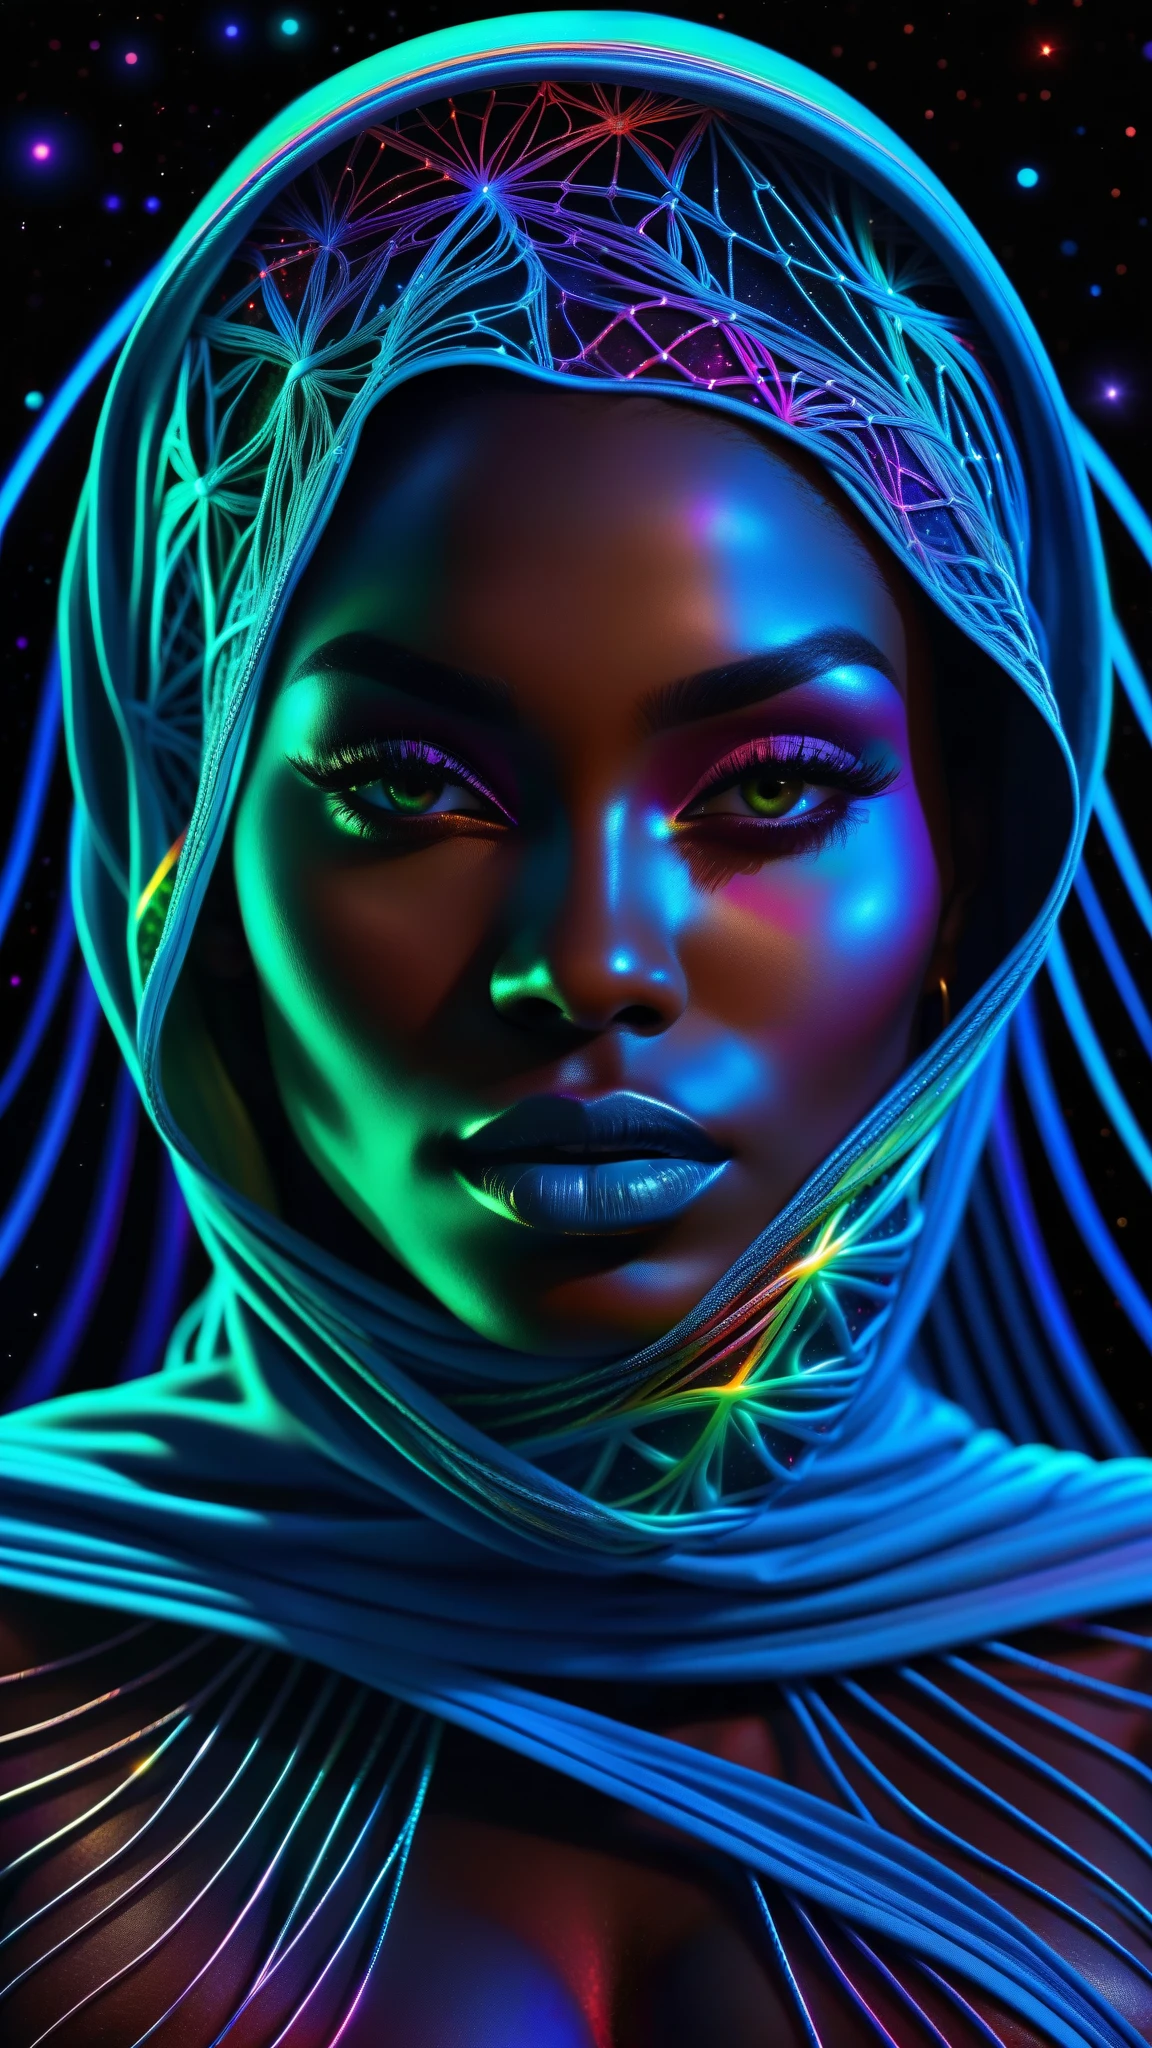 cartoon style, masterpiece, best quality, ultra high res, extremely detailed, (psychedelic art:1.4), black woman, African designed veil, visually stunning, beautiful, award-winning illustration, cosmic space background, ethereal atmosphere, ultra quality, beautiful black woman, cosmical concept, rainbow strings, rainbow skin, rainbow bloody veins growing and intertwining out of the darkness, nailed wire, oozing thick blue blood, sharp neon, veins growing and pumping blood, vascular networks growing, green veins everywhere, yin and yang, glowing space, glowing stars, infinity symbol